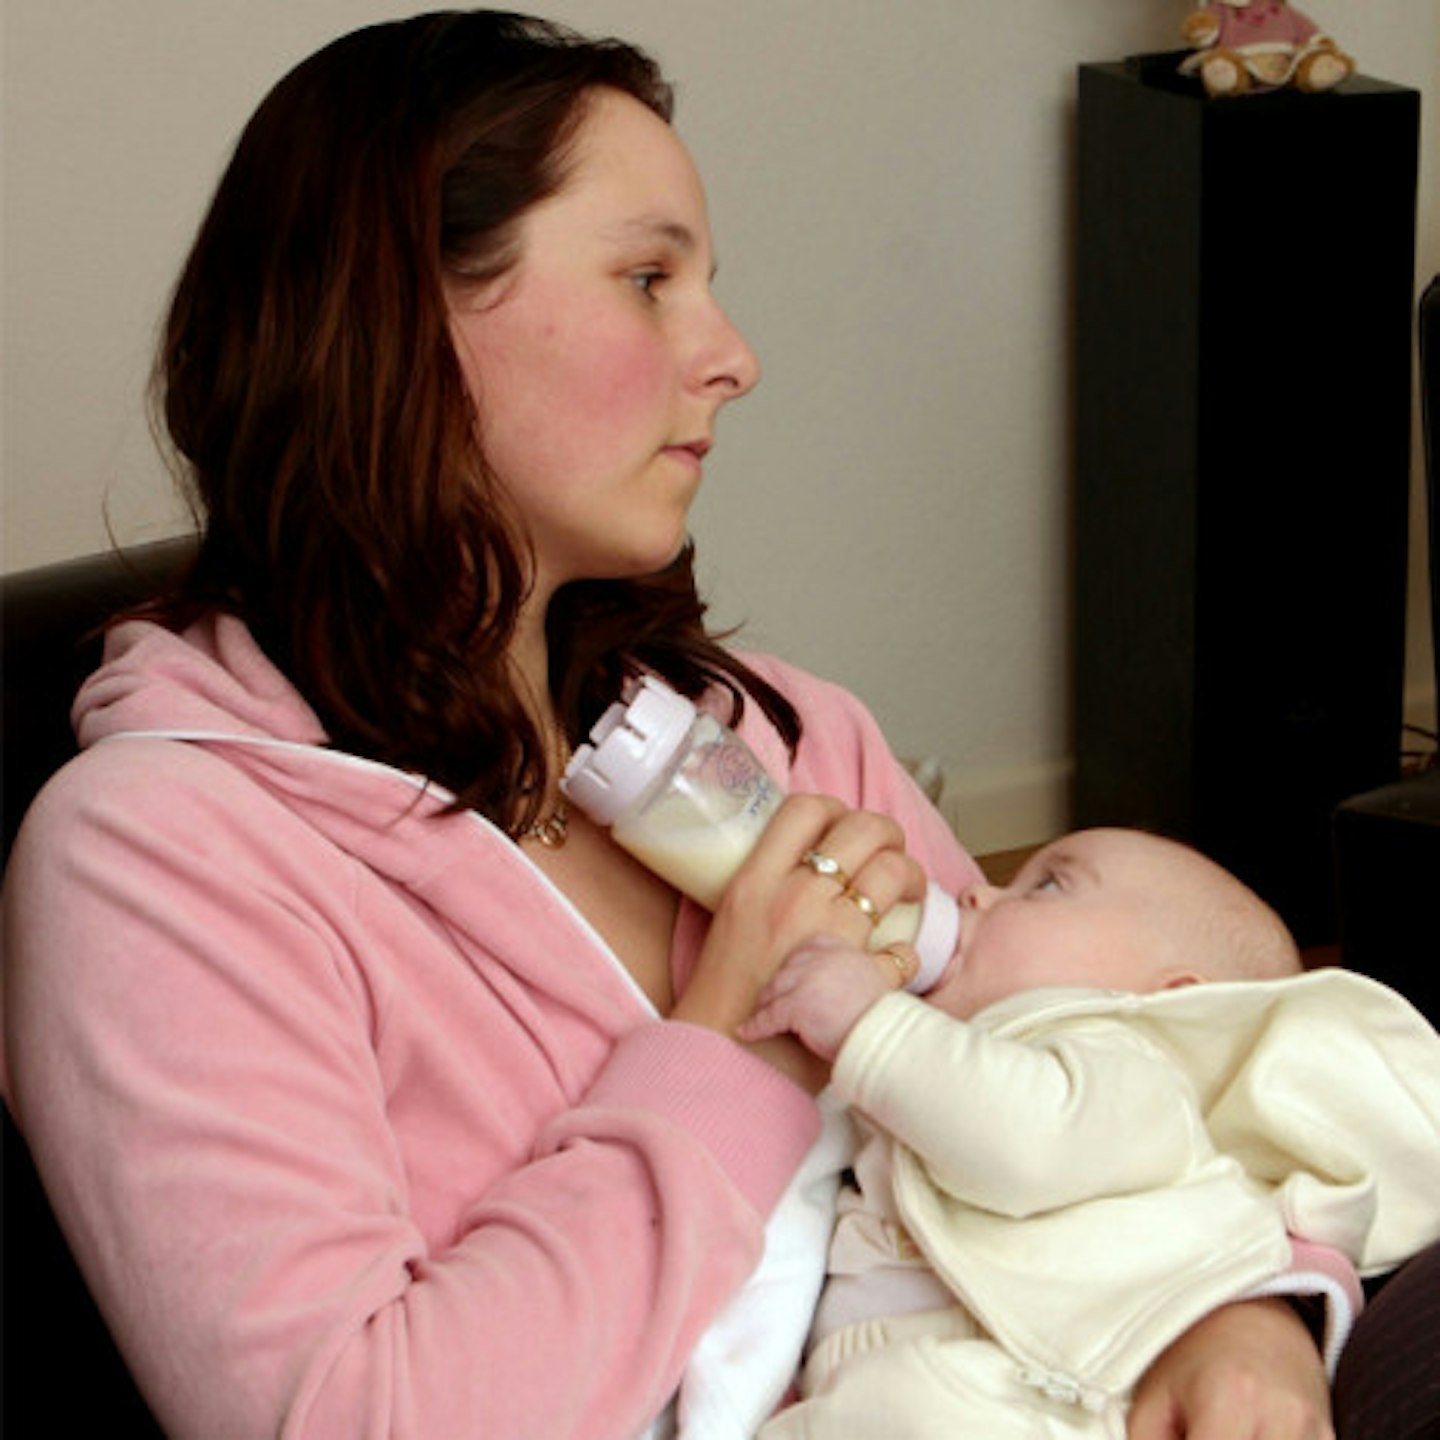 Sharon insists her decision to breastfeed her daughter for as long as she wants